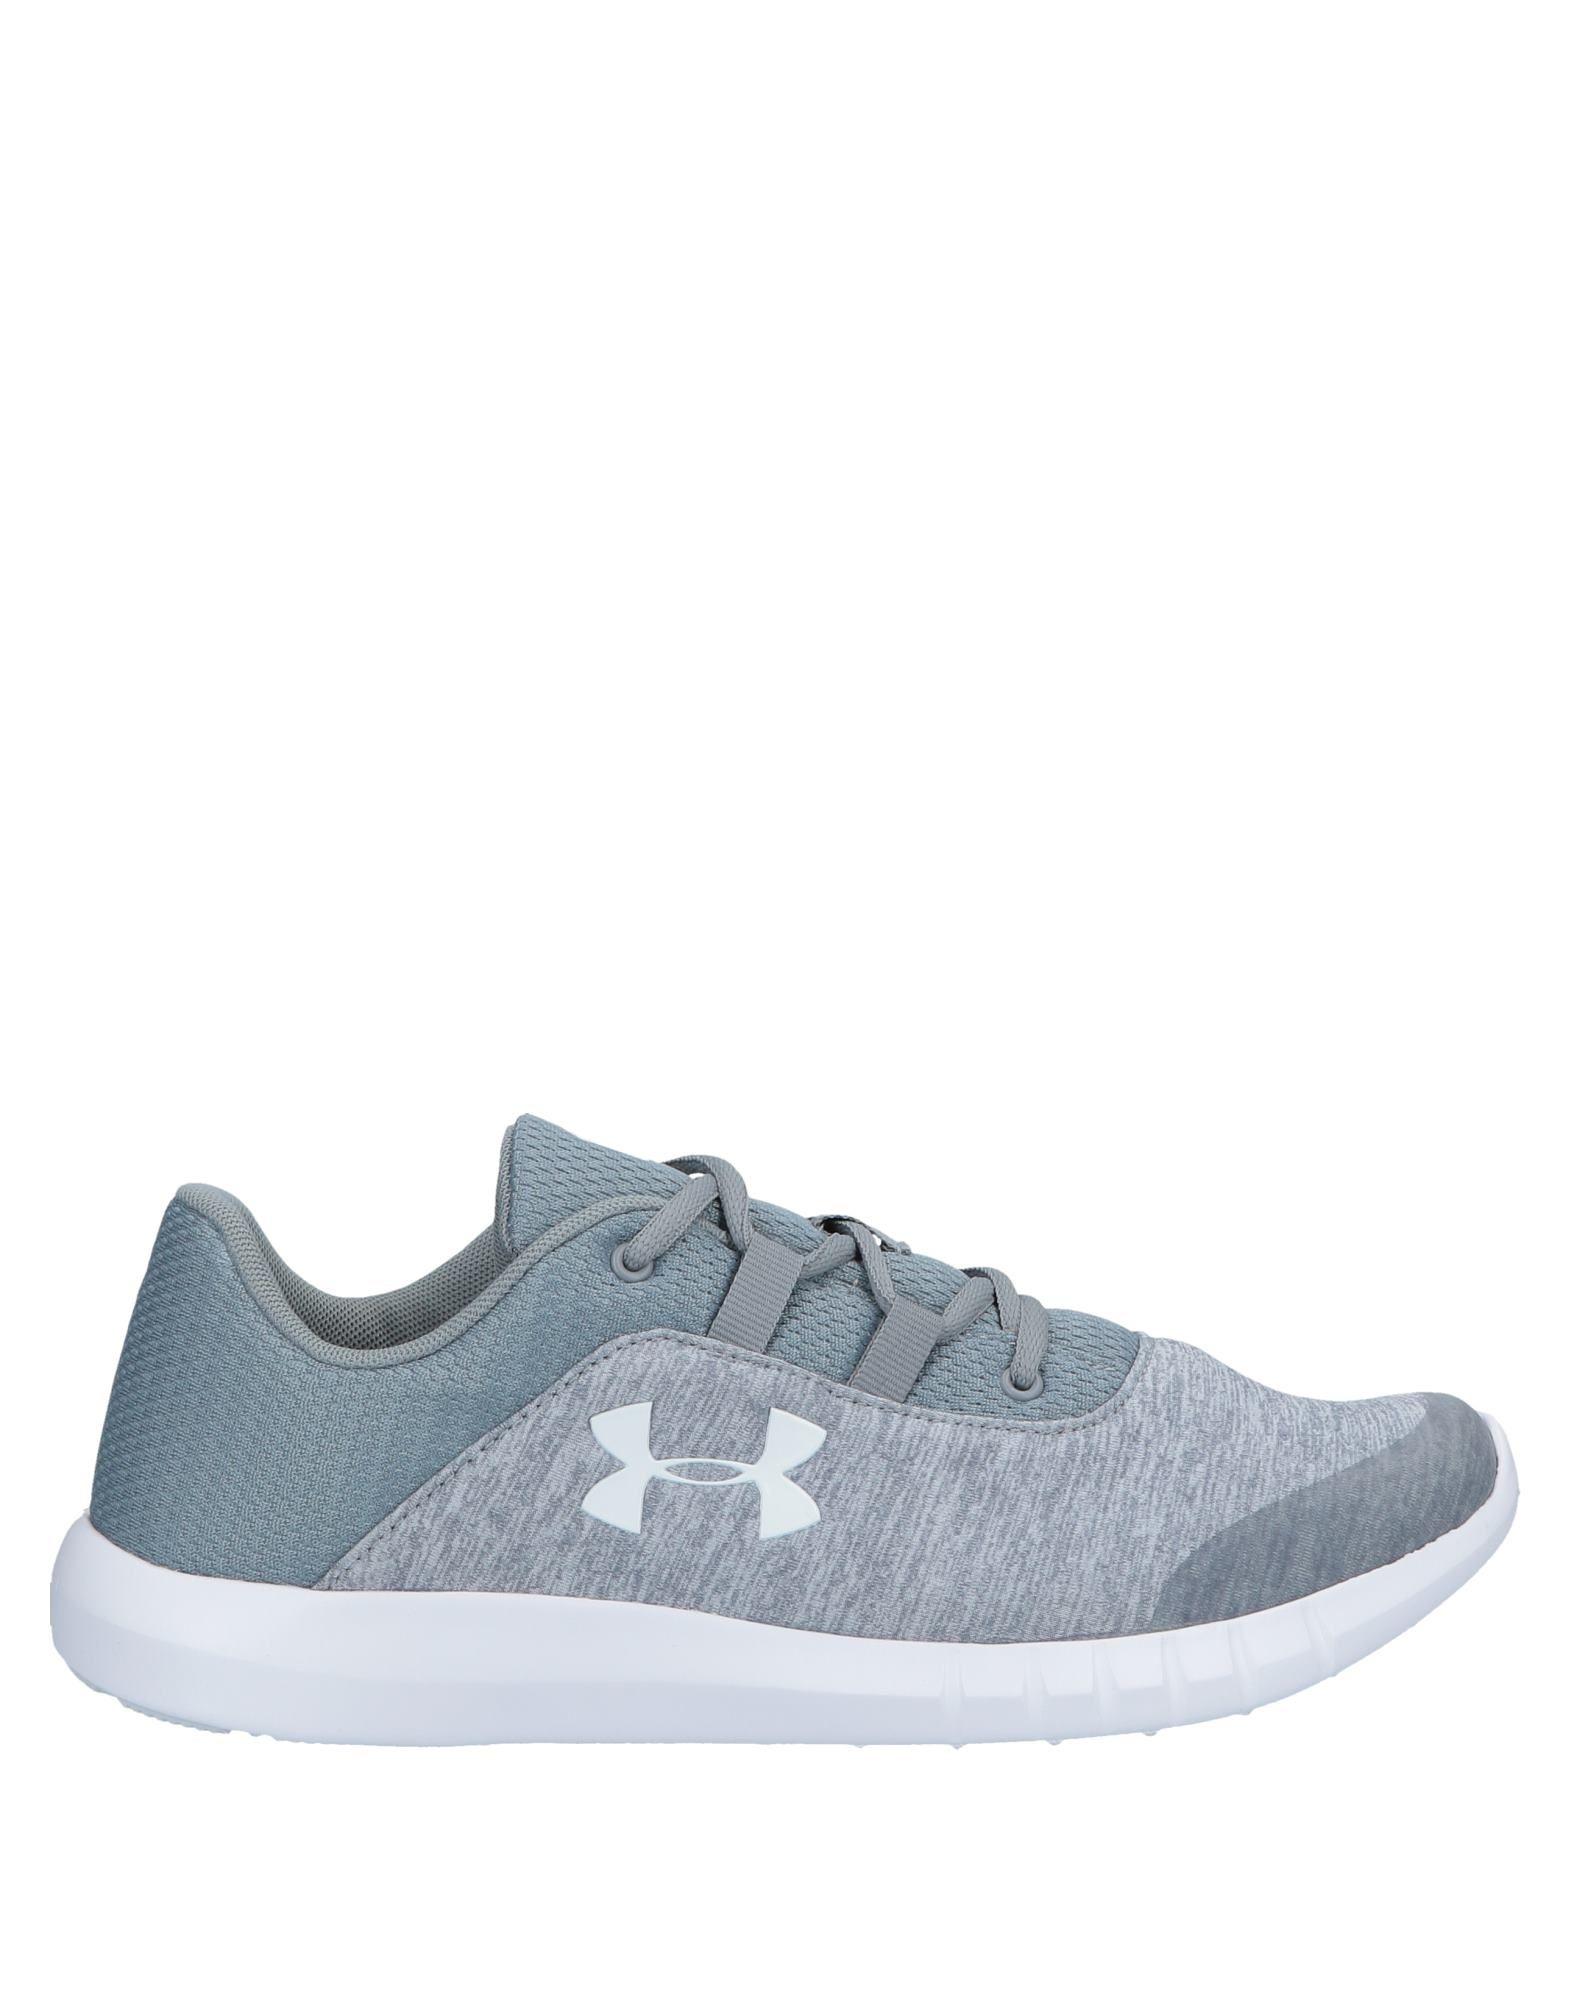 Under Armour Rubber Low-tops & Sneakers in Light Grey (Gray) for Men - Lyst